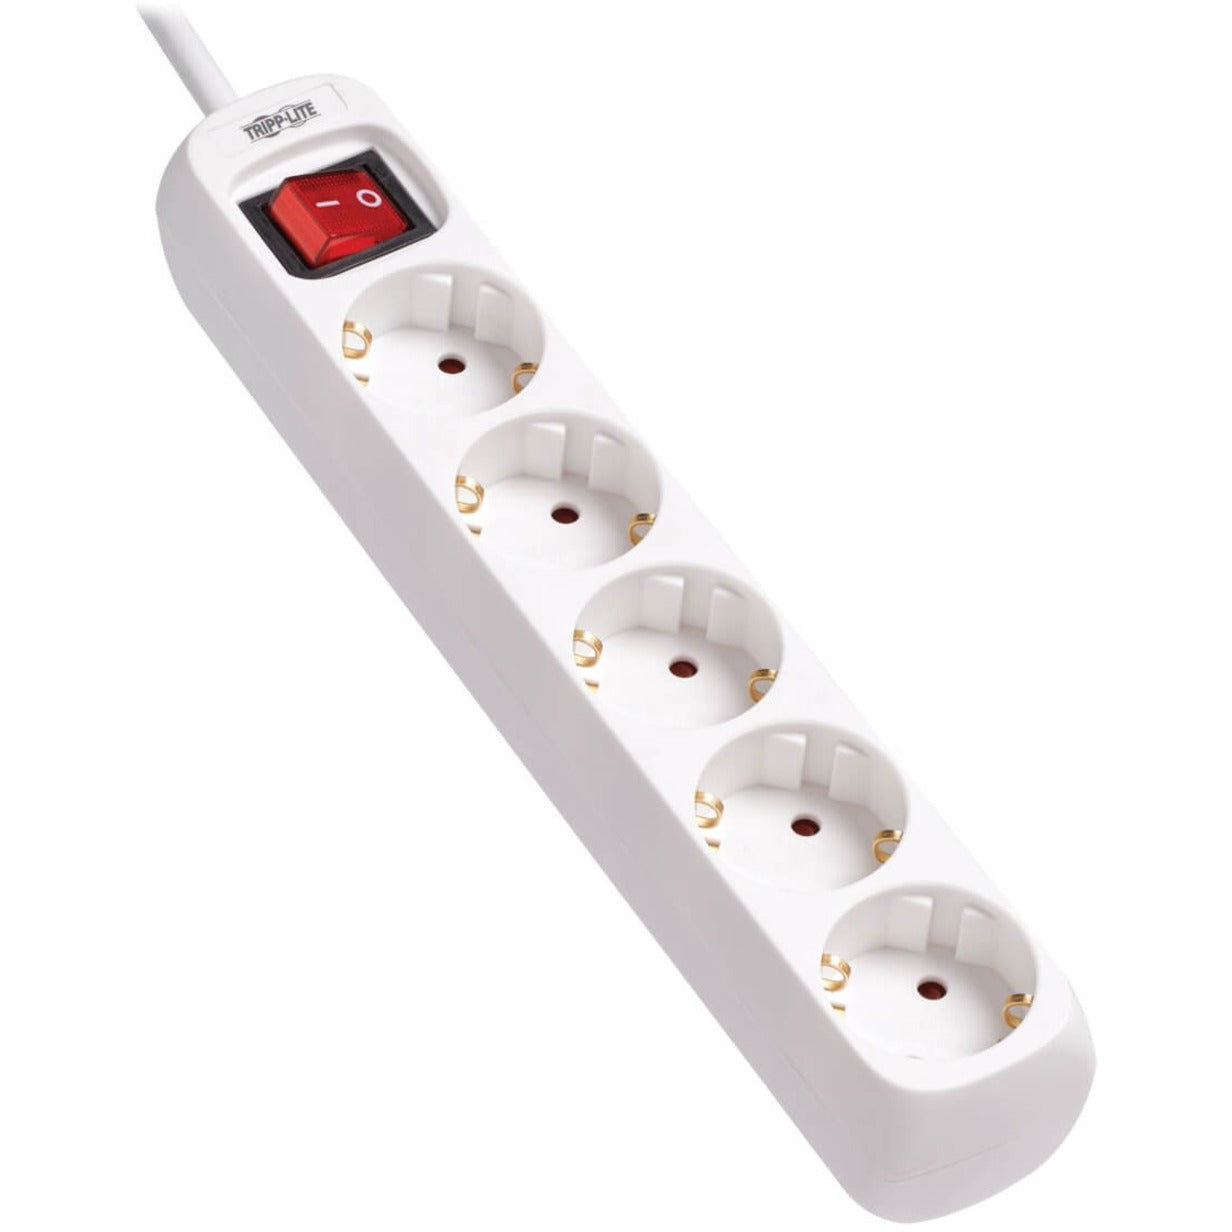 Tripp Lite PS5G15 Protect It! 5-Outlet Power Strip, German Type F, White